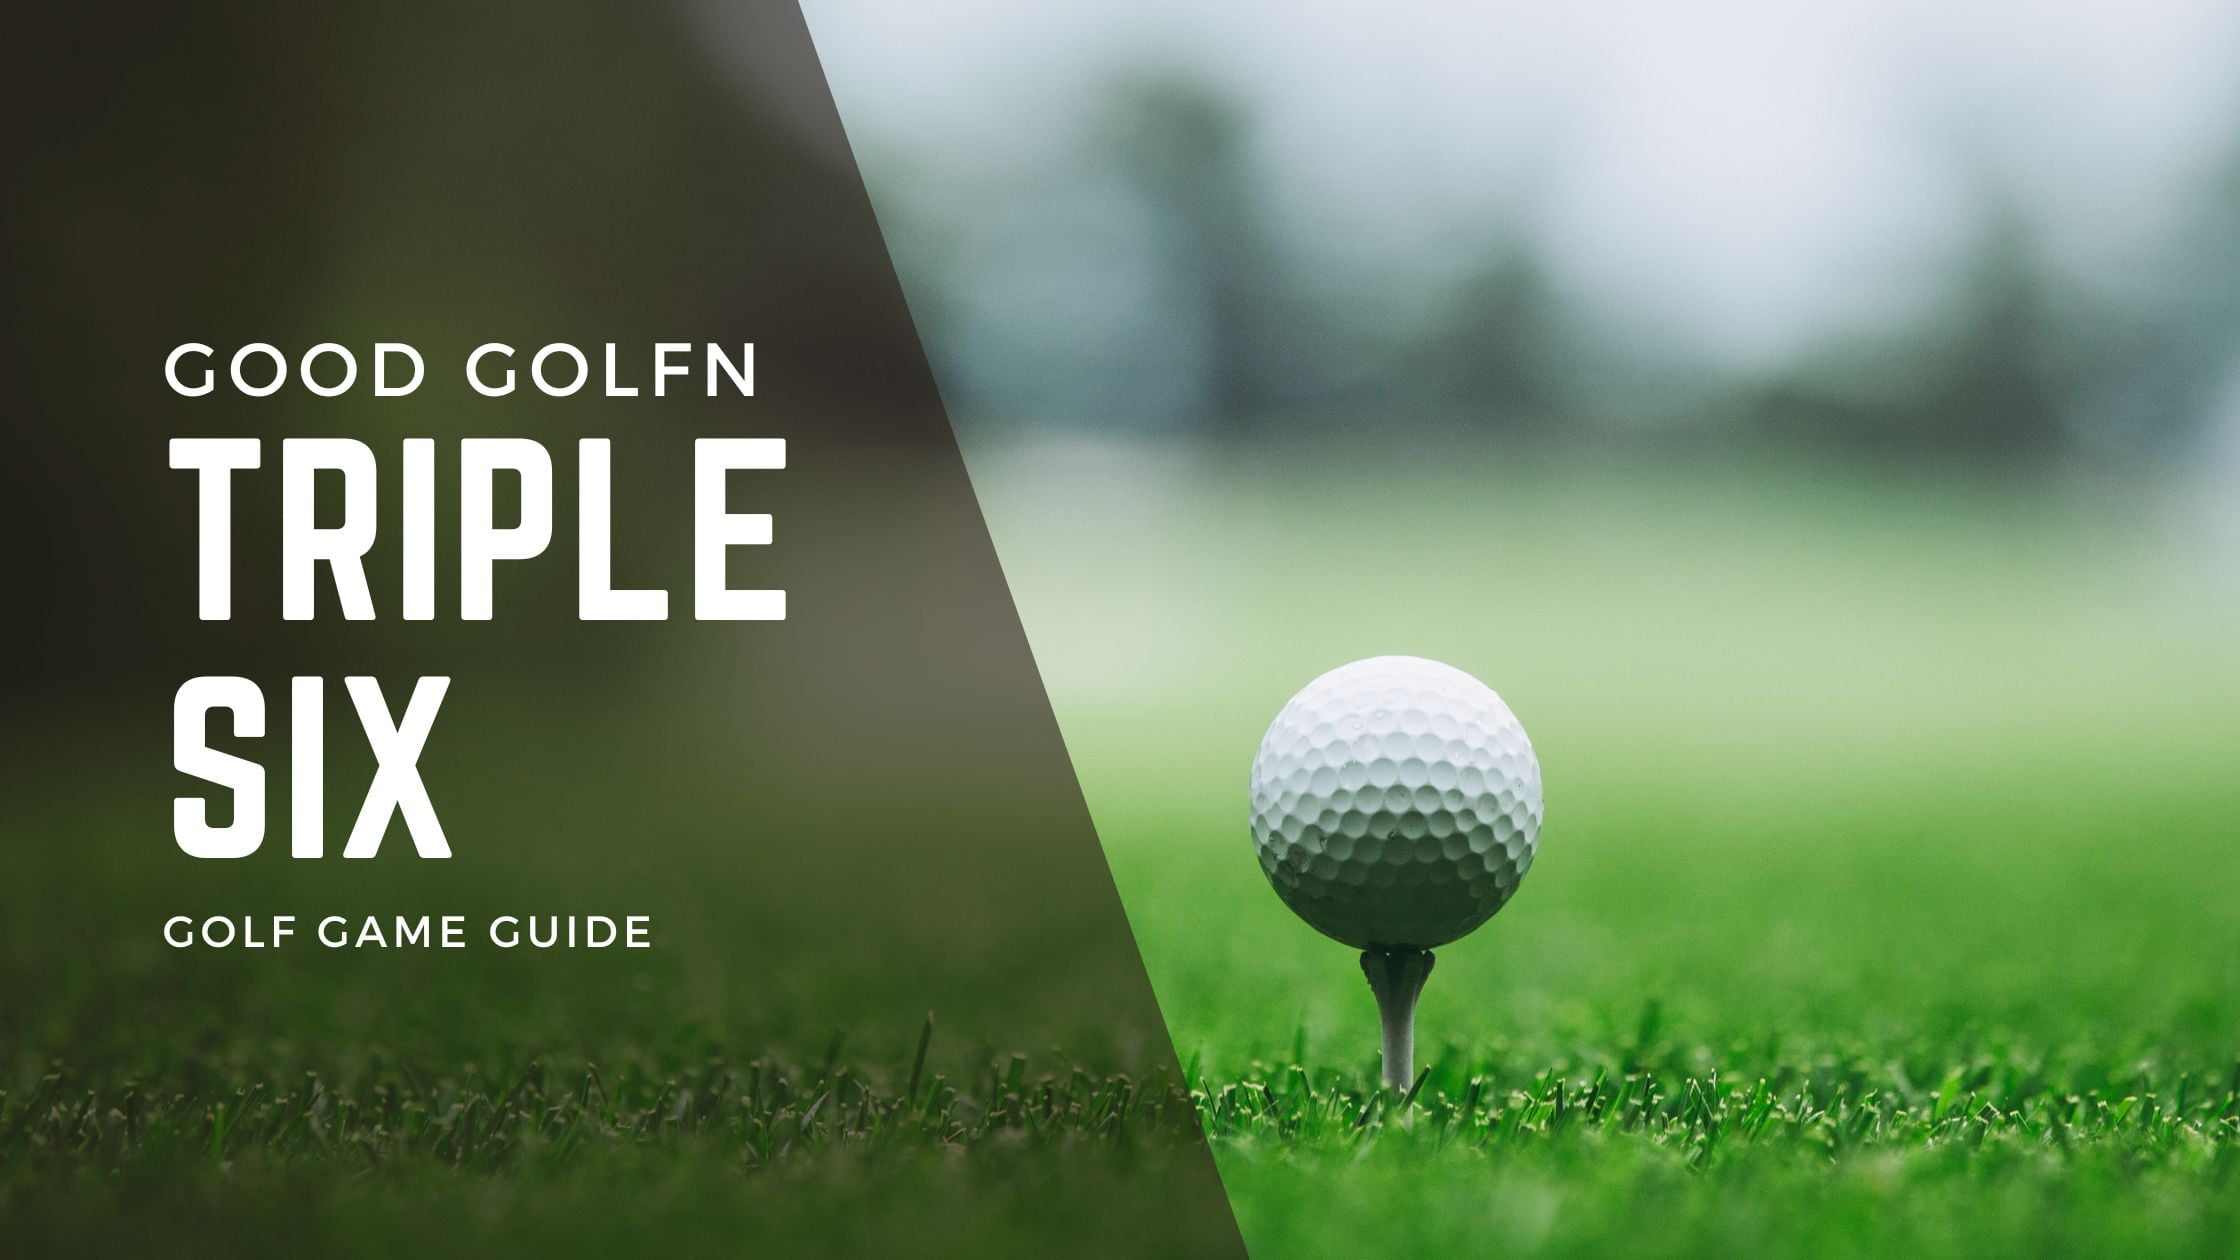 Dive into the Triple Six golf format! Learn the nuances of playing sixes, alternate shots, best ball strategies, and more.